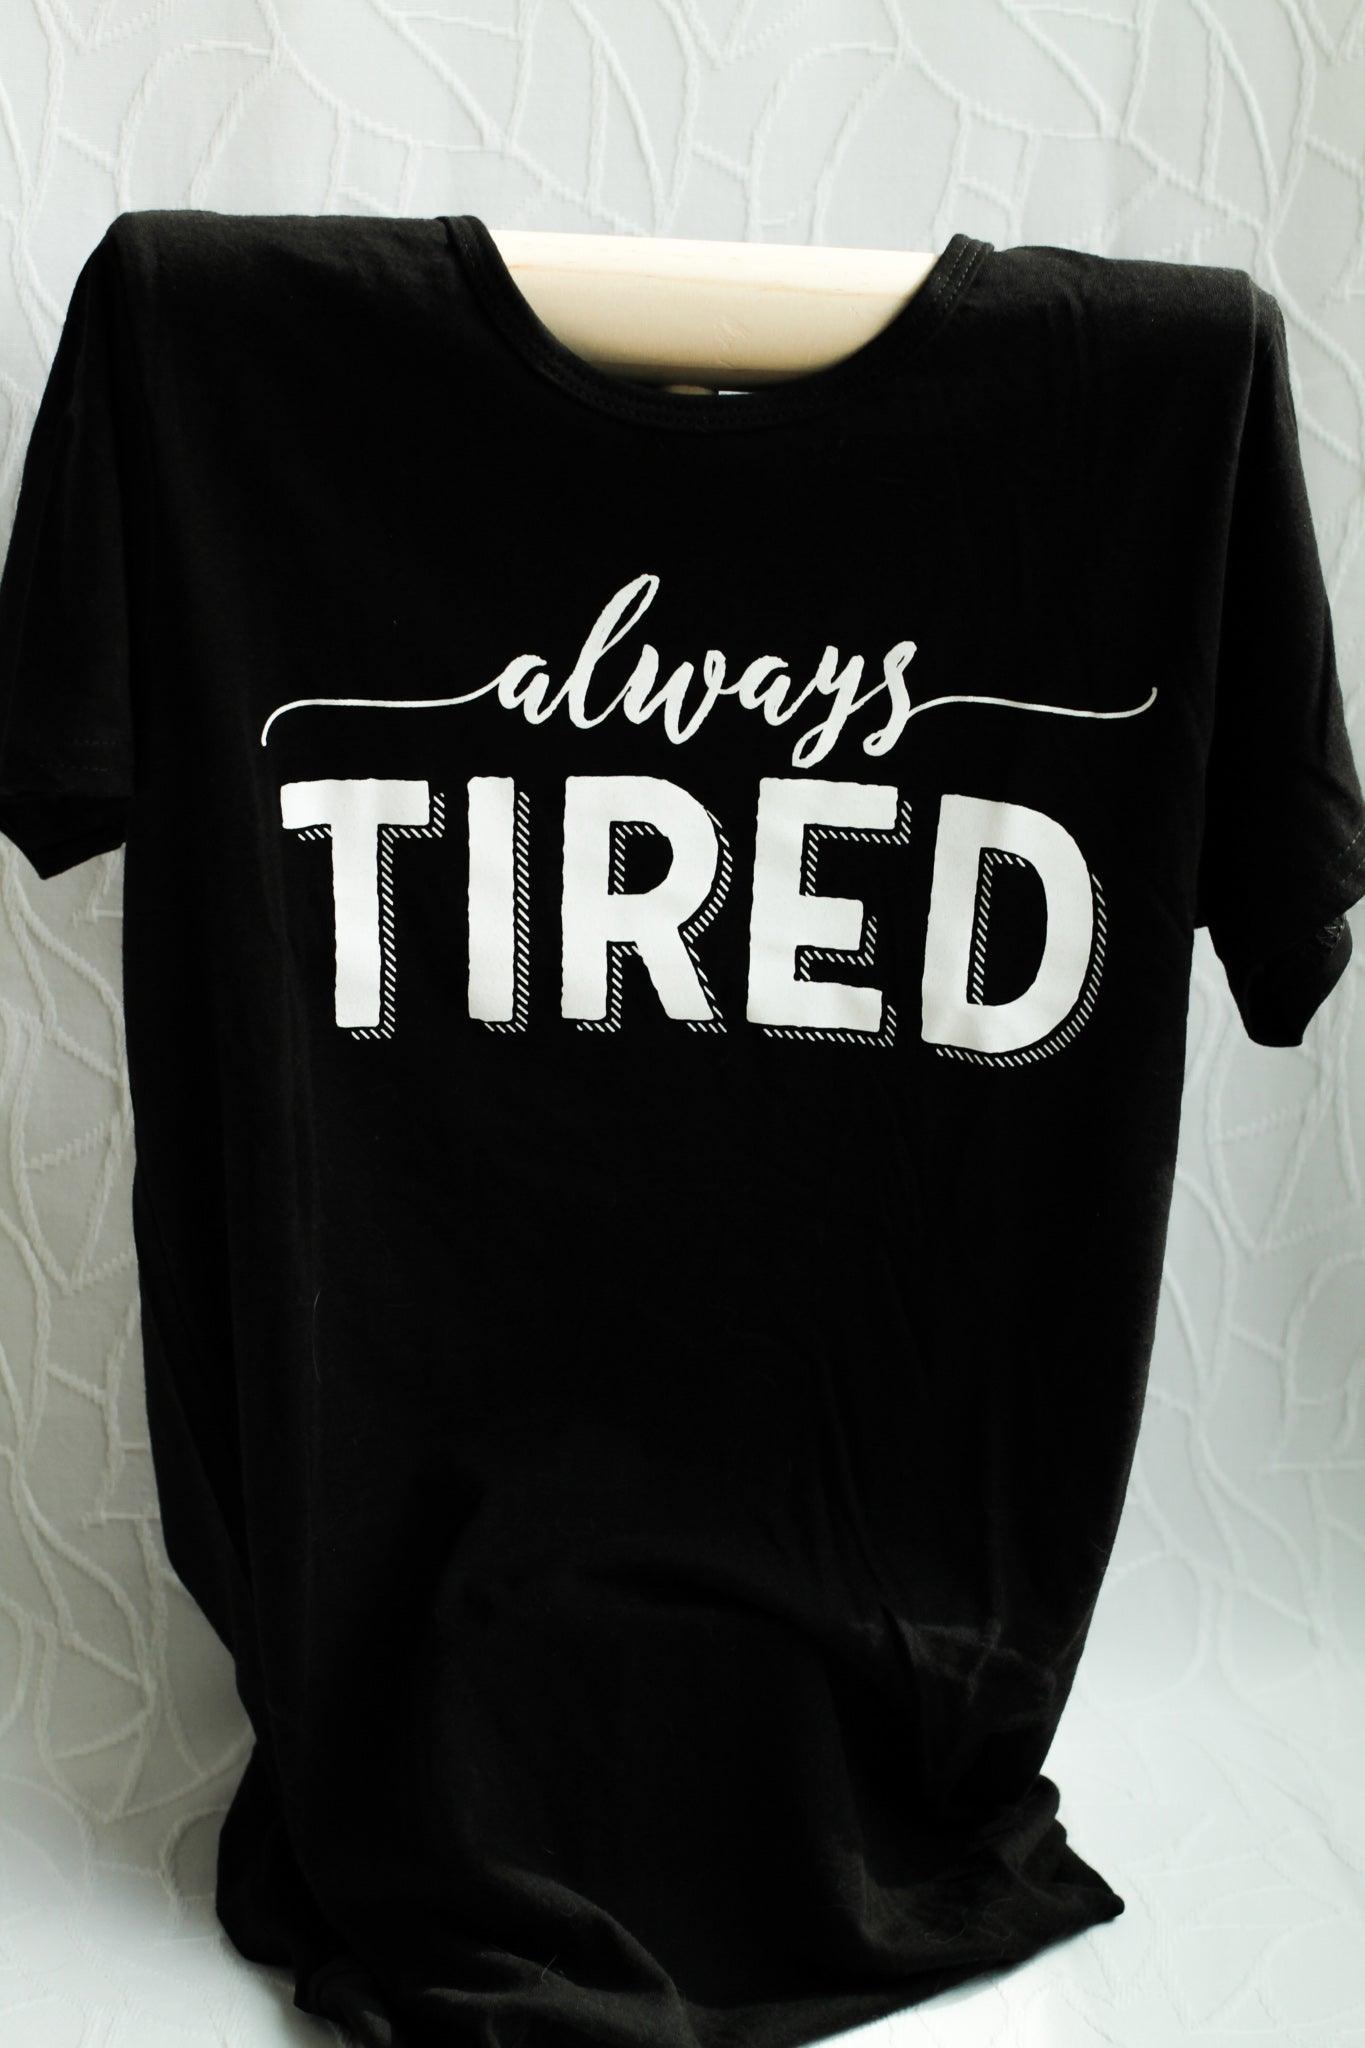 Learner timeren tema Pretty Sick Designs - Always Tired T-Shirt - Bamboo Cotton